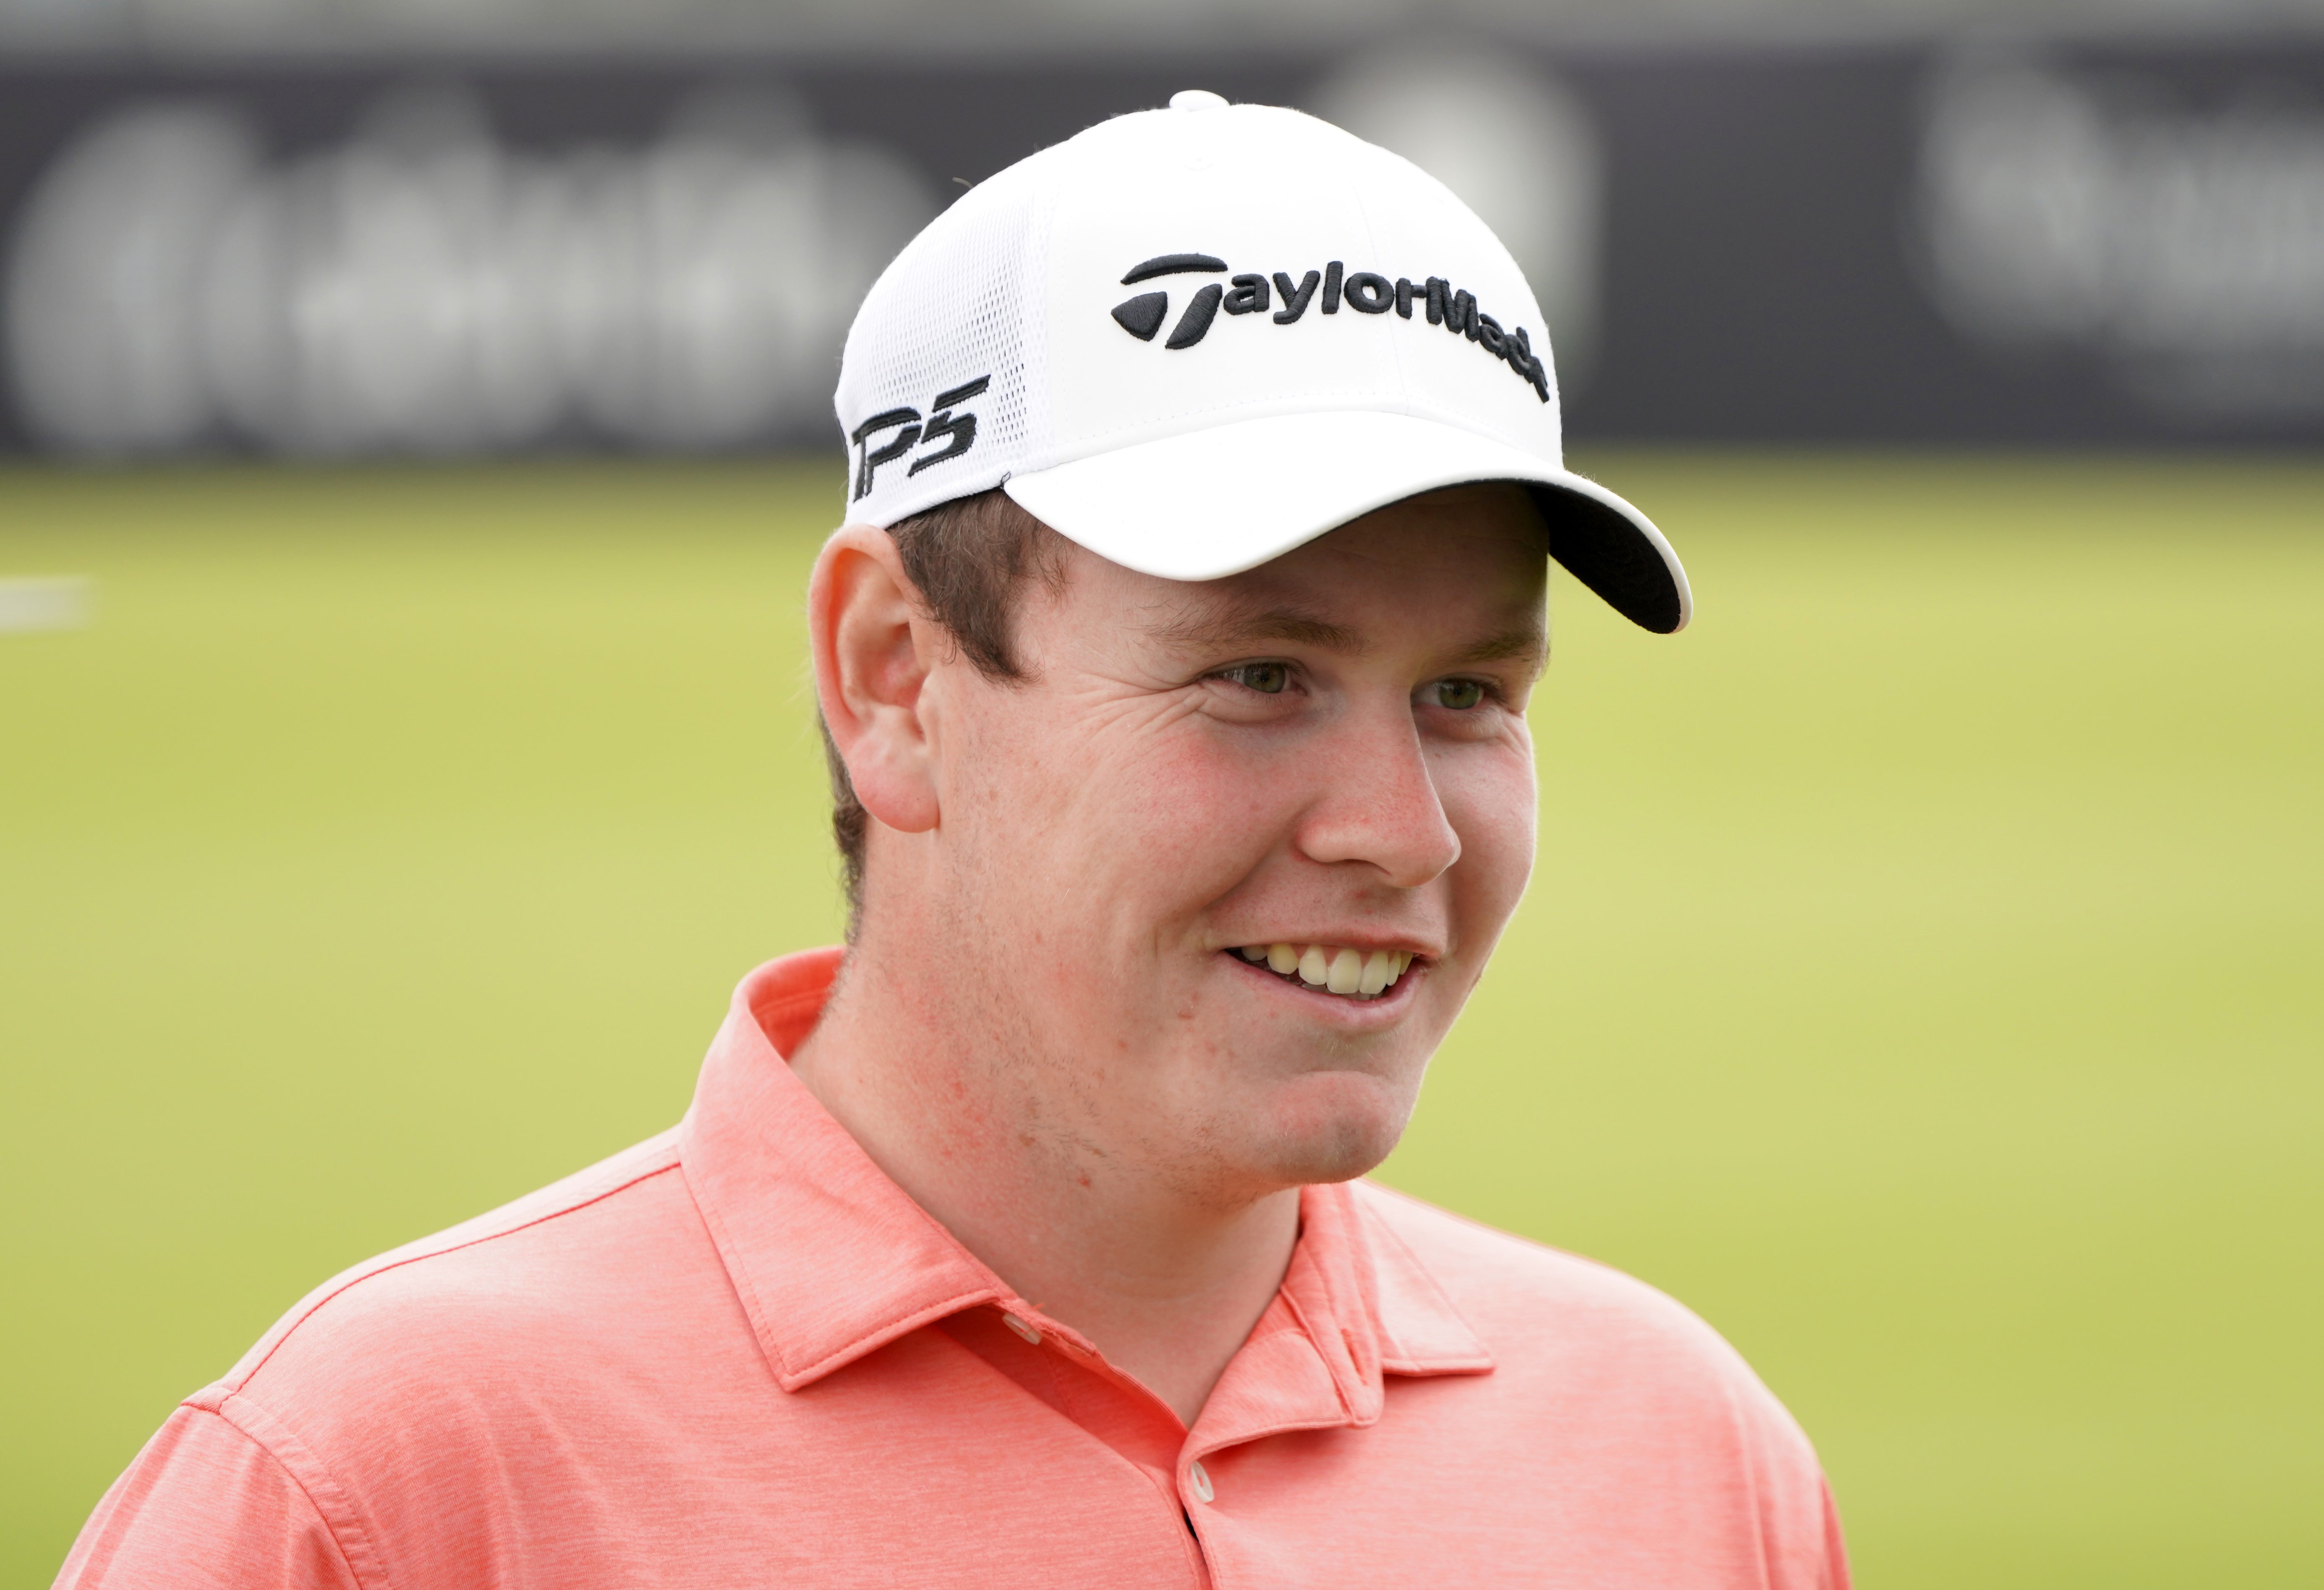 Scotland’s Robert MacIntyre is seeking a second European Tour title in the Portugal Masters (Jane Barlow/PA)